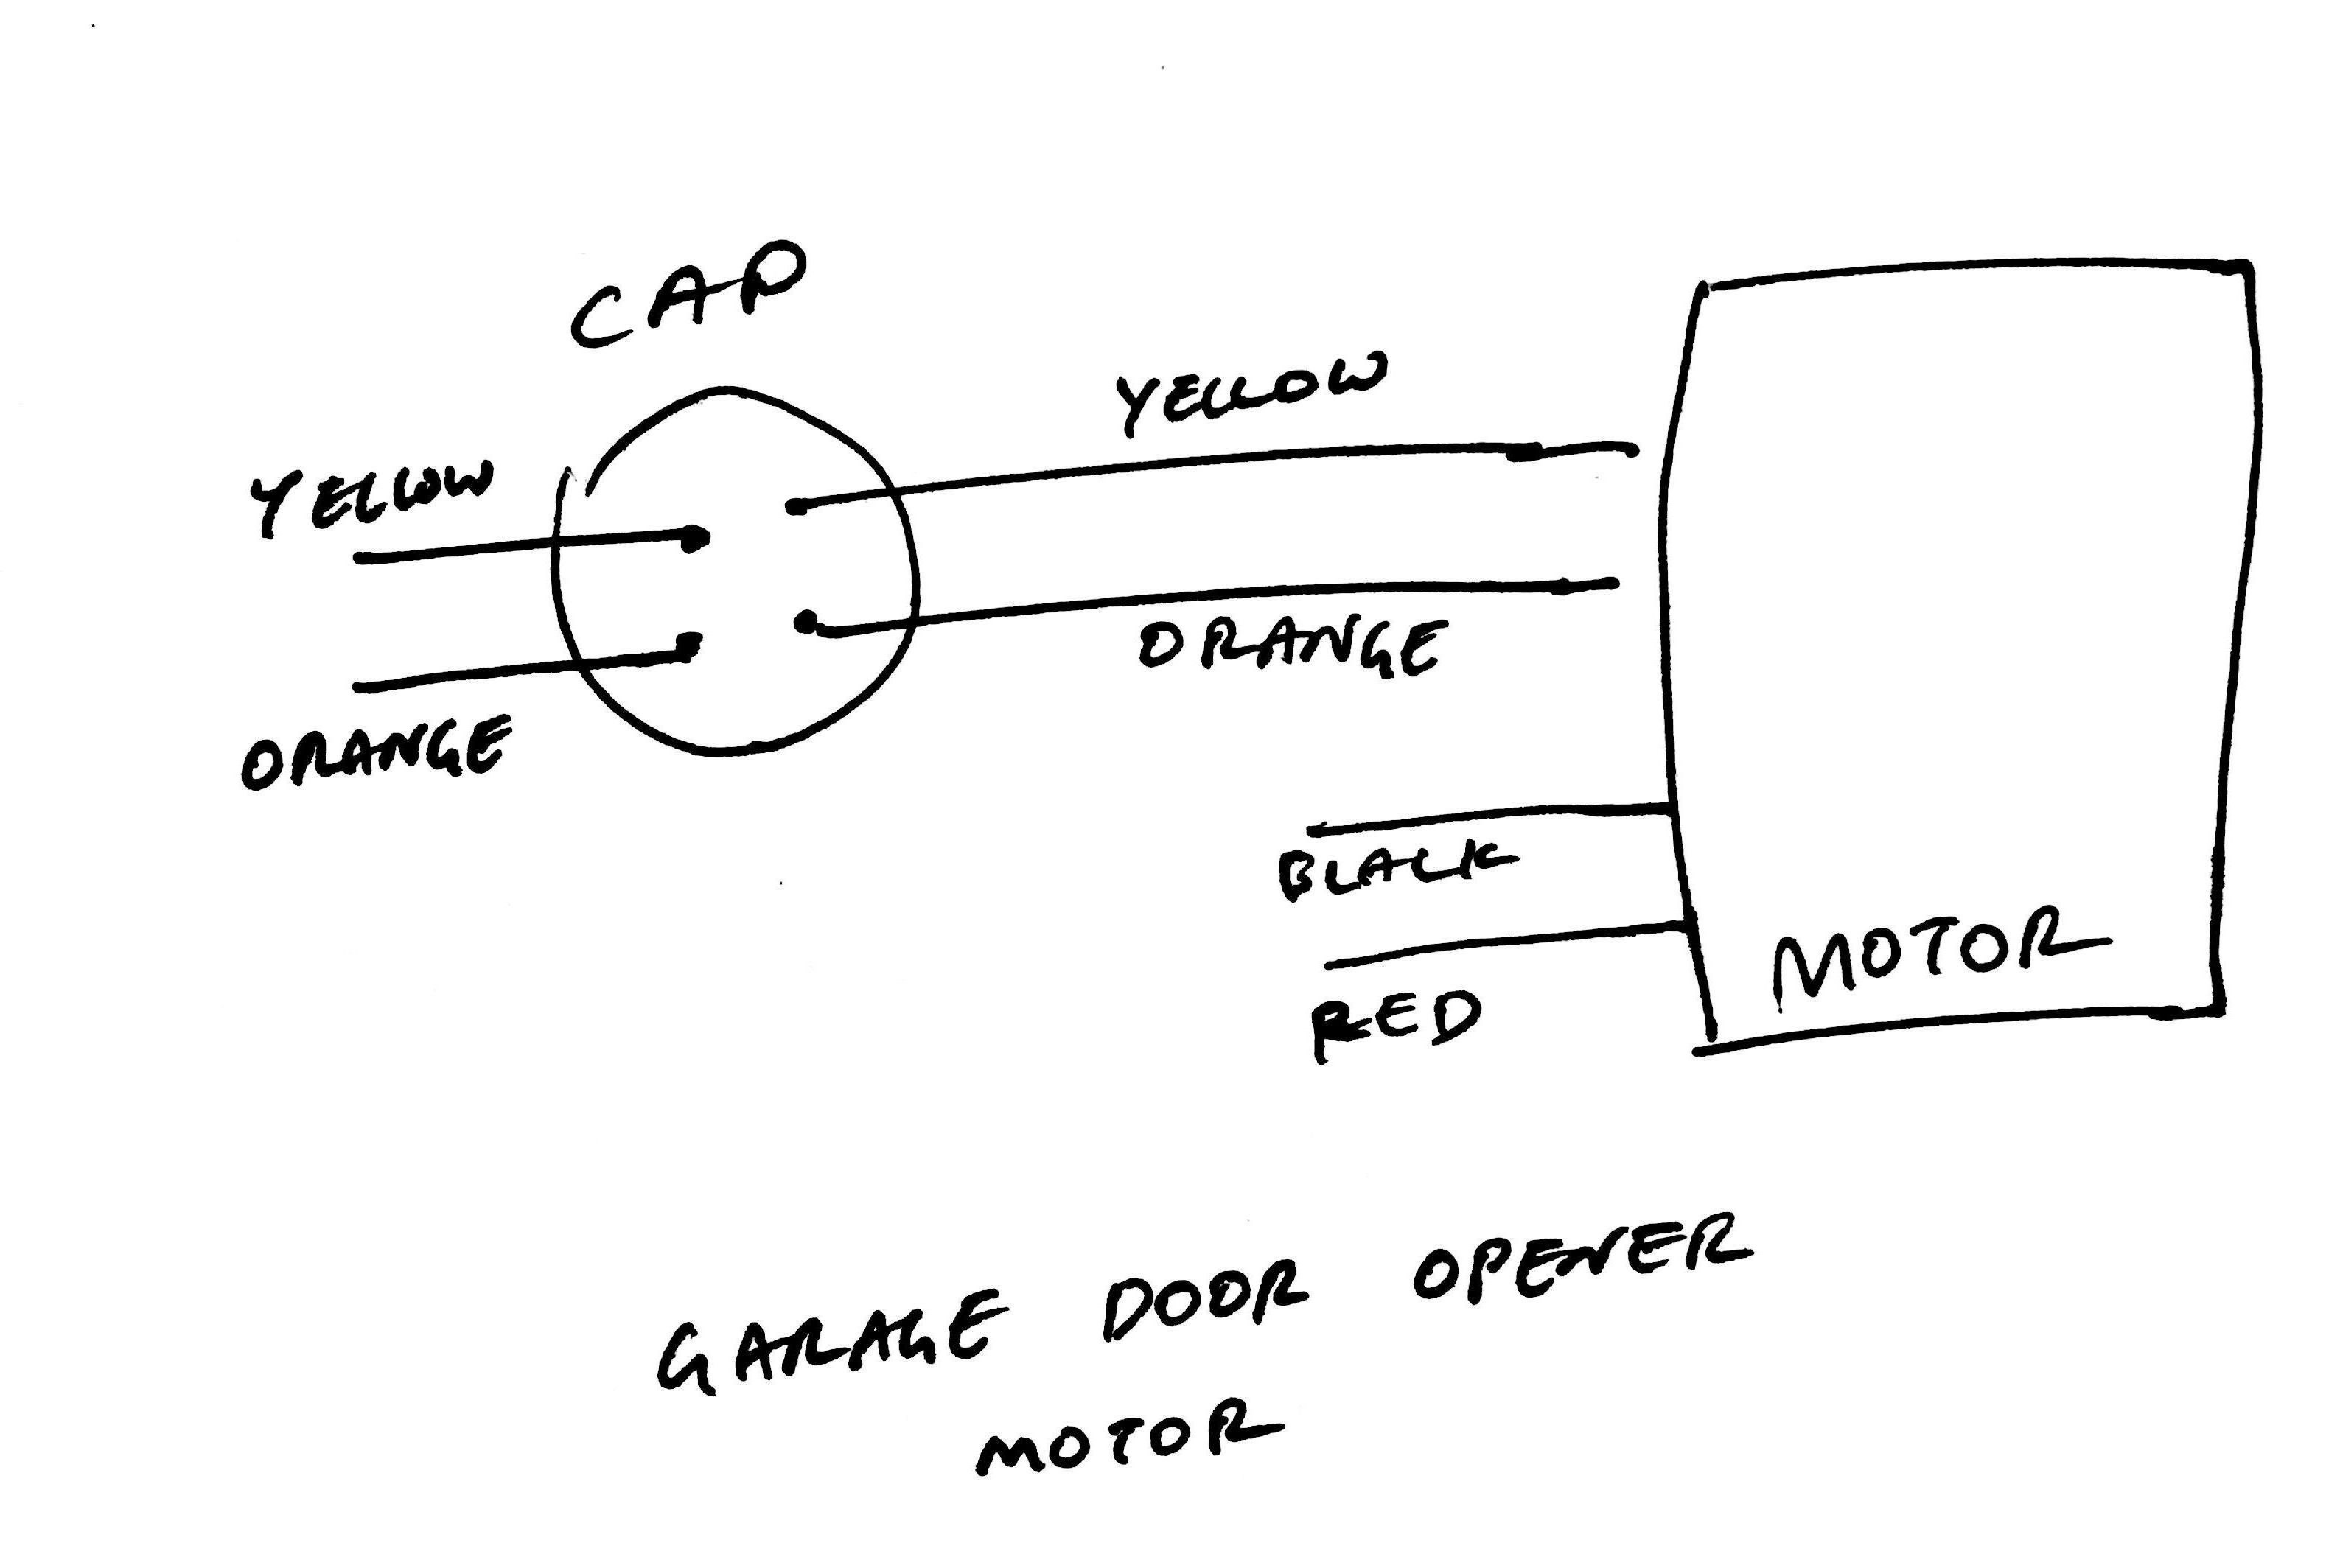 Wiring Diagram for Ac Capacitor New Ac Wiring Diagram Marvellous Ac Motor Capacitor Wiring Diagram